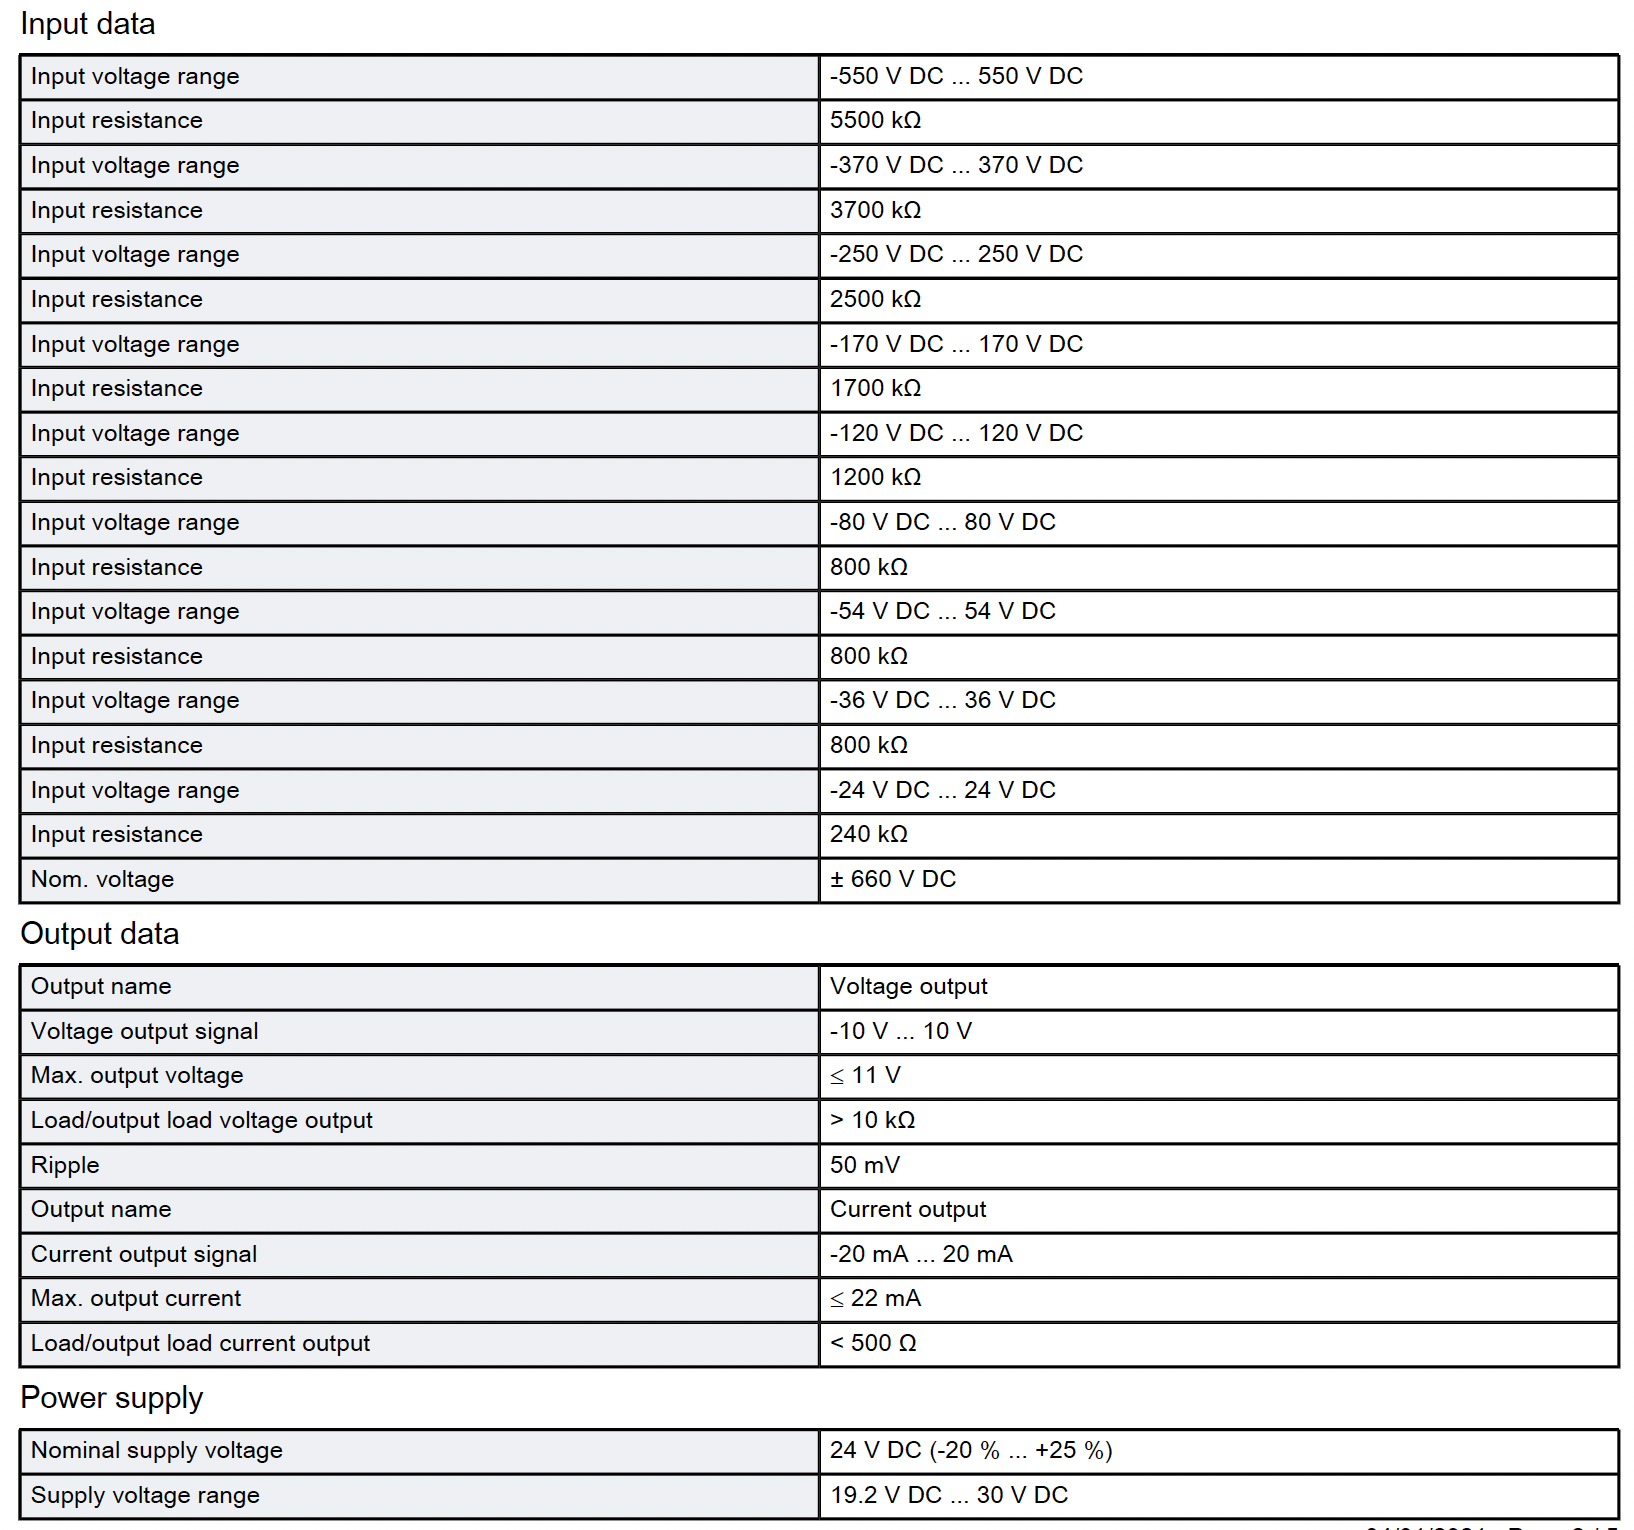 Table from Datasheet 66.pdf